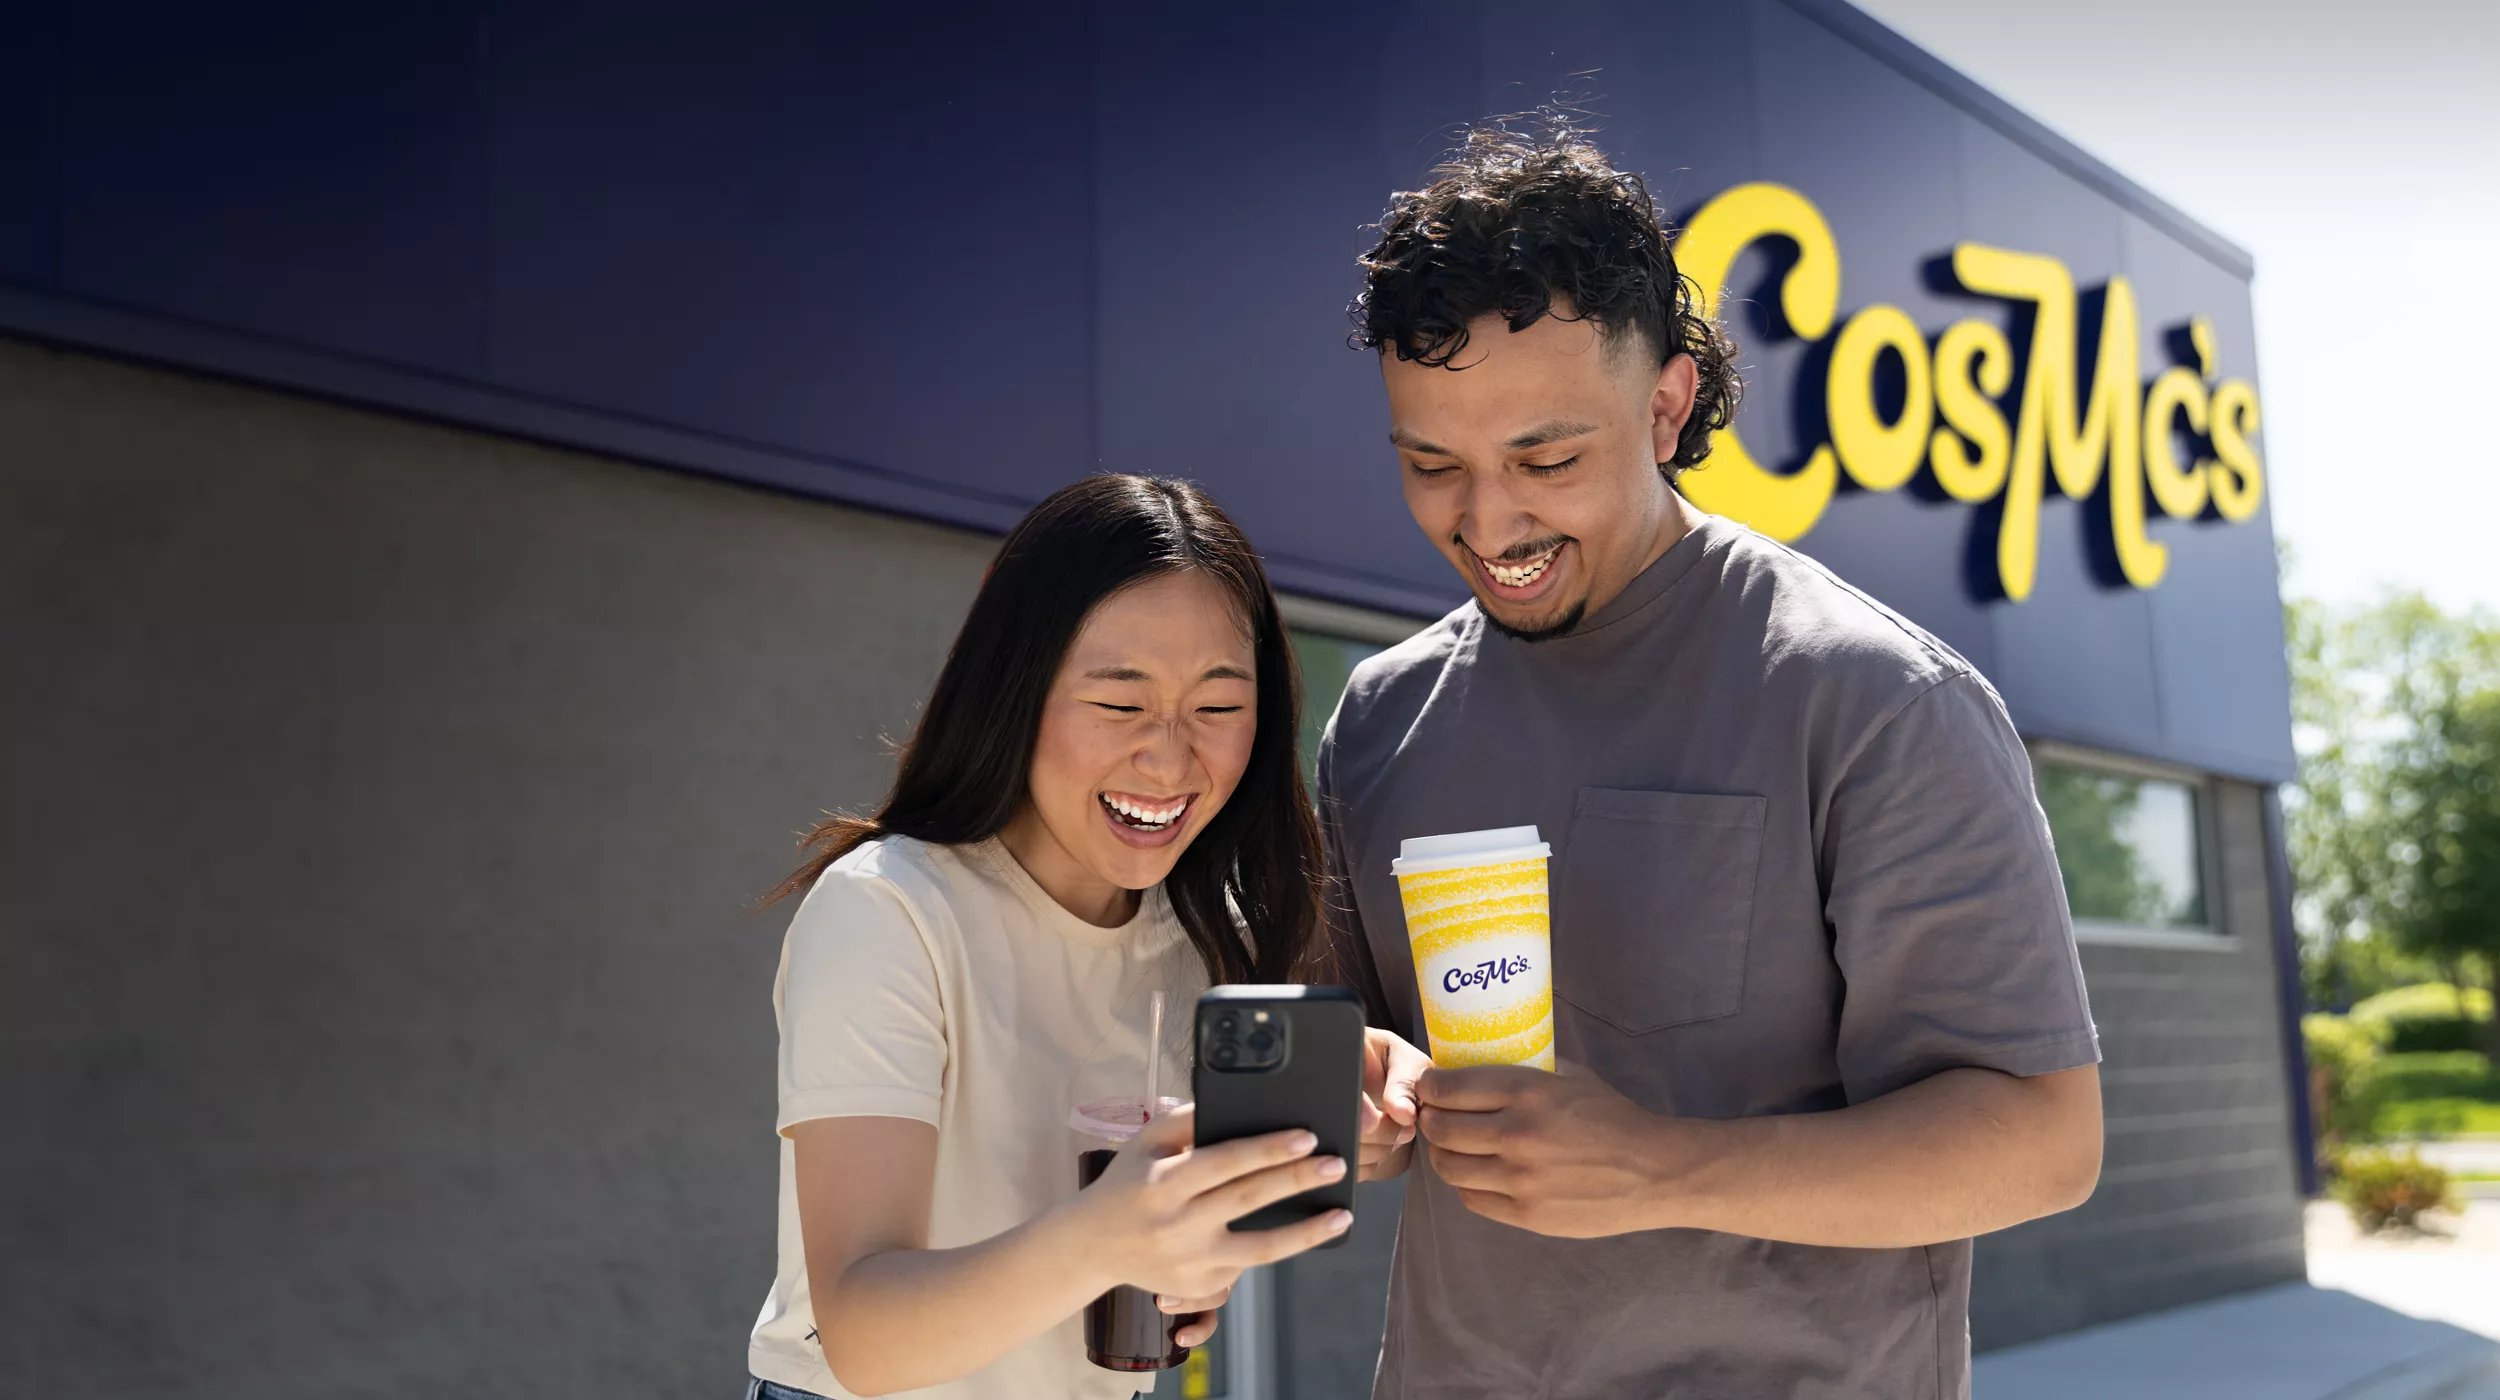 Two young adults use the CosMc's app on their mobile device.